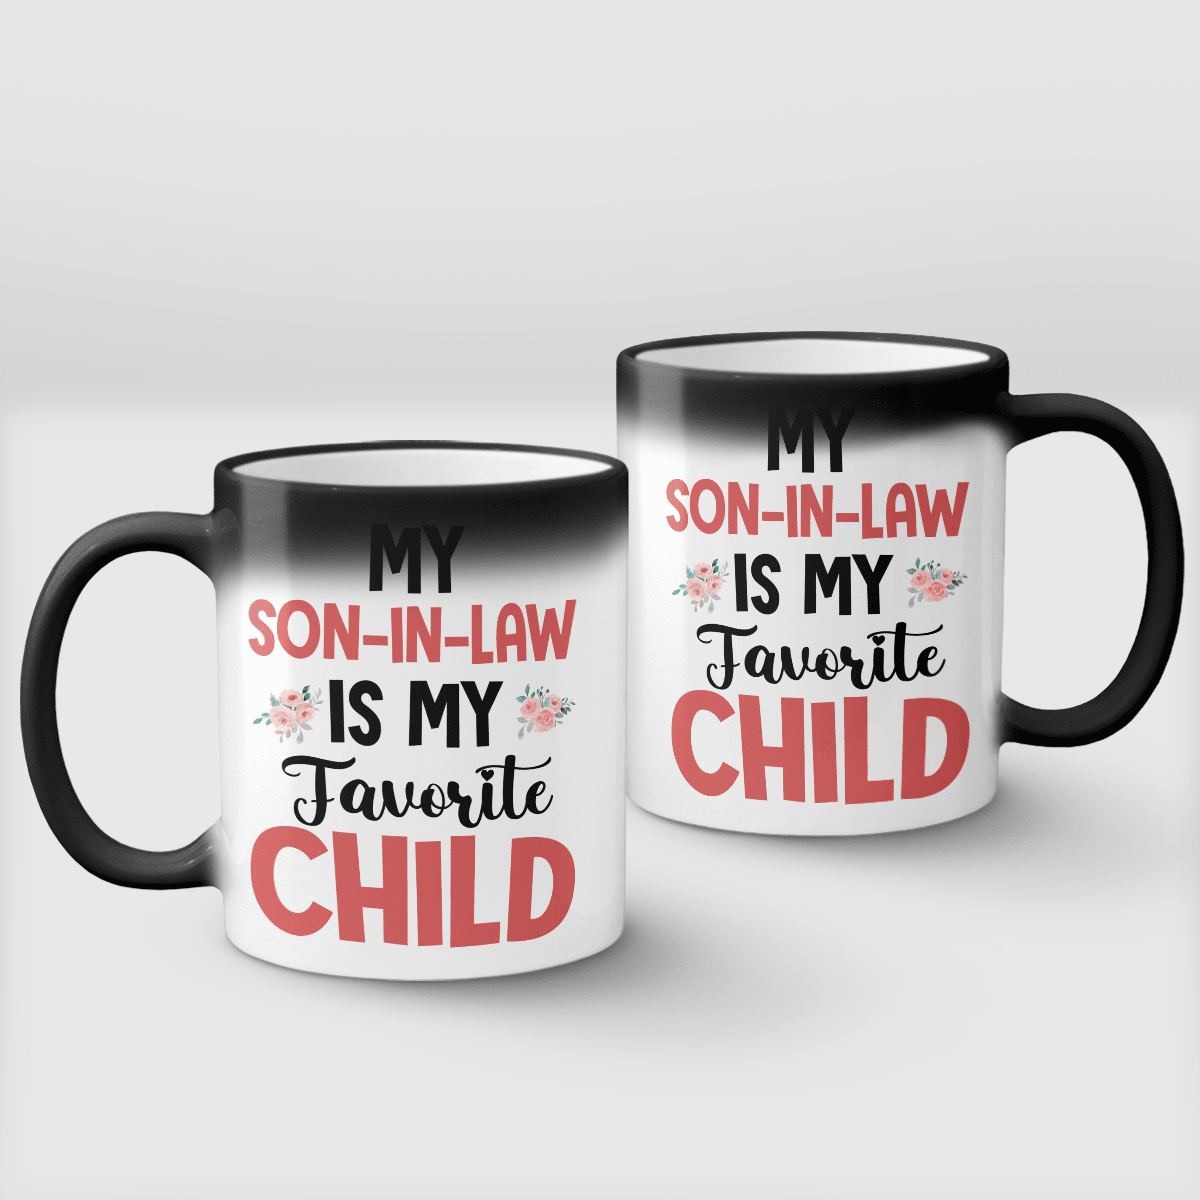 MY SON-IN-LAW IS MY FAVORITE CHILD - MUG - 81t0323